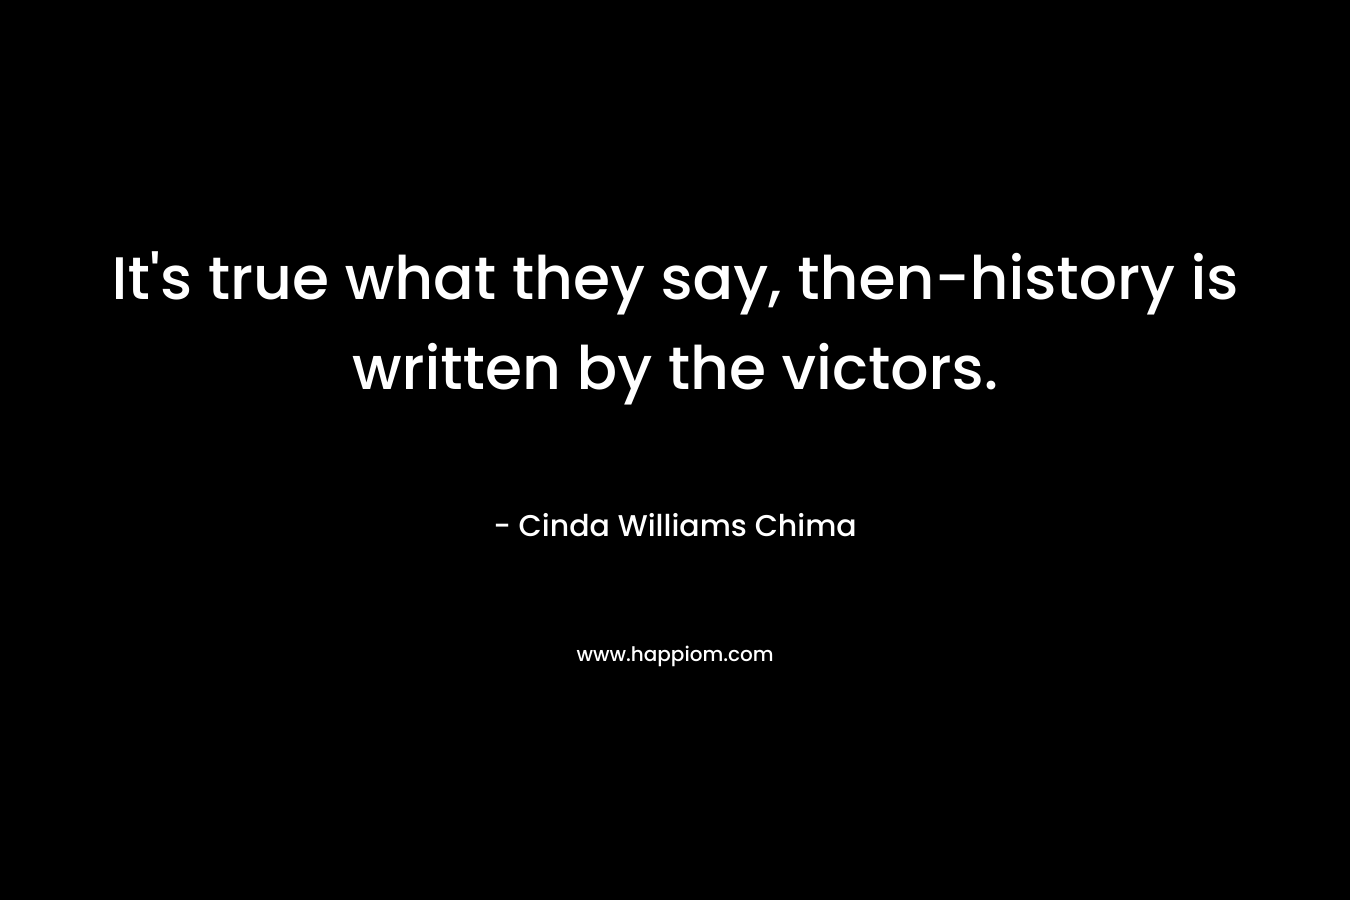 It's true what they say, then-history is written by the victors.